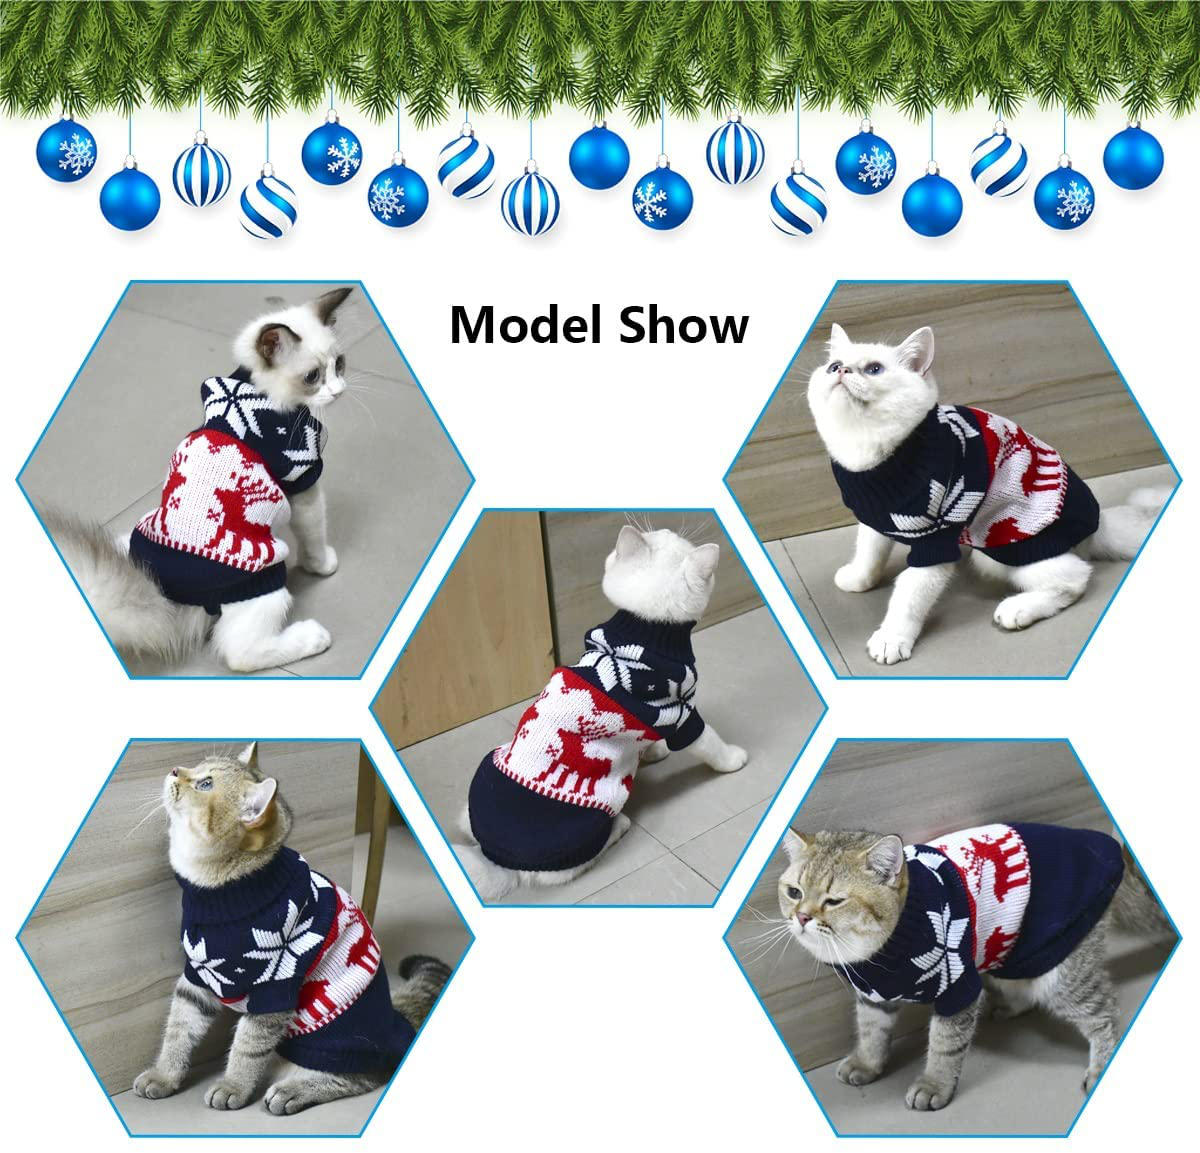 Vehomy Pet Puppy Christmas Sweater Cat Winter Knitwear Xmas Clothes Navy Blue Sweater with Reindeers Snowflakes Pattern Dog Warm Argyle Sweater Coat for Kittens Small Dogs Cats Animals & Pet Supplies > Pet Supplies > Dog Supplies > Dog Apparel Vehomy   